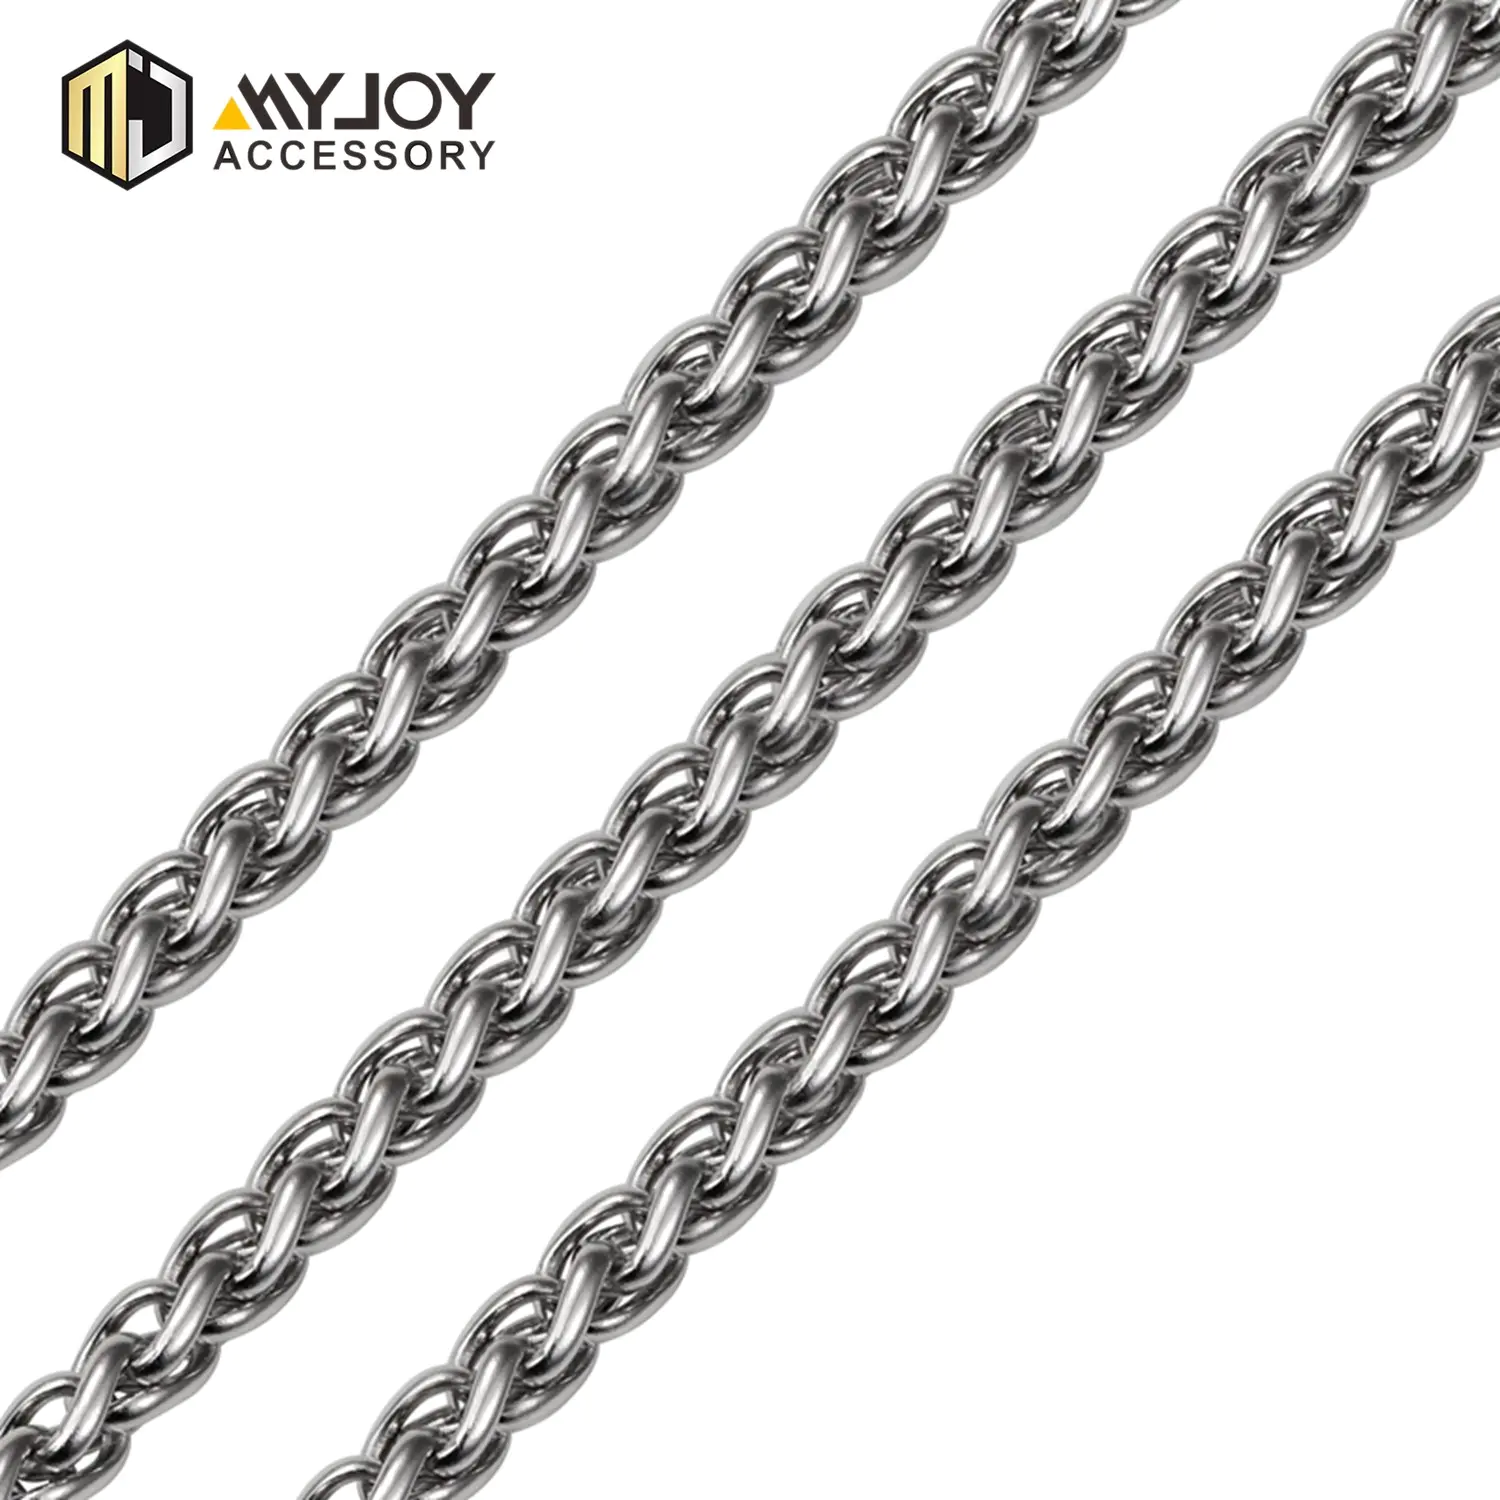 MYJOY chains chain strap Suppliers for purses